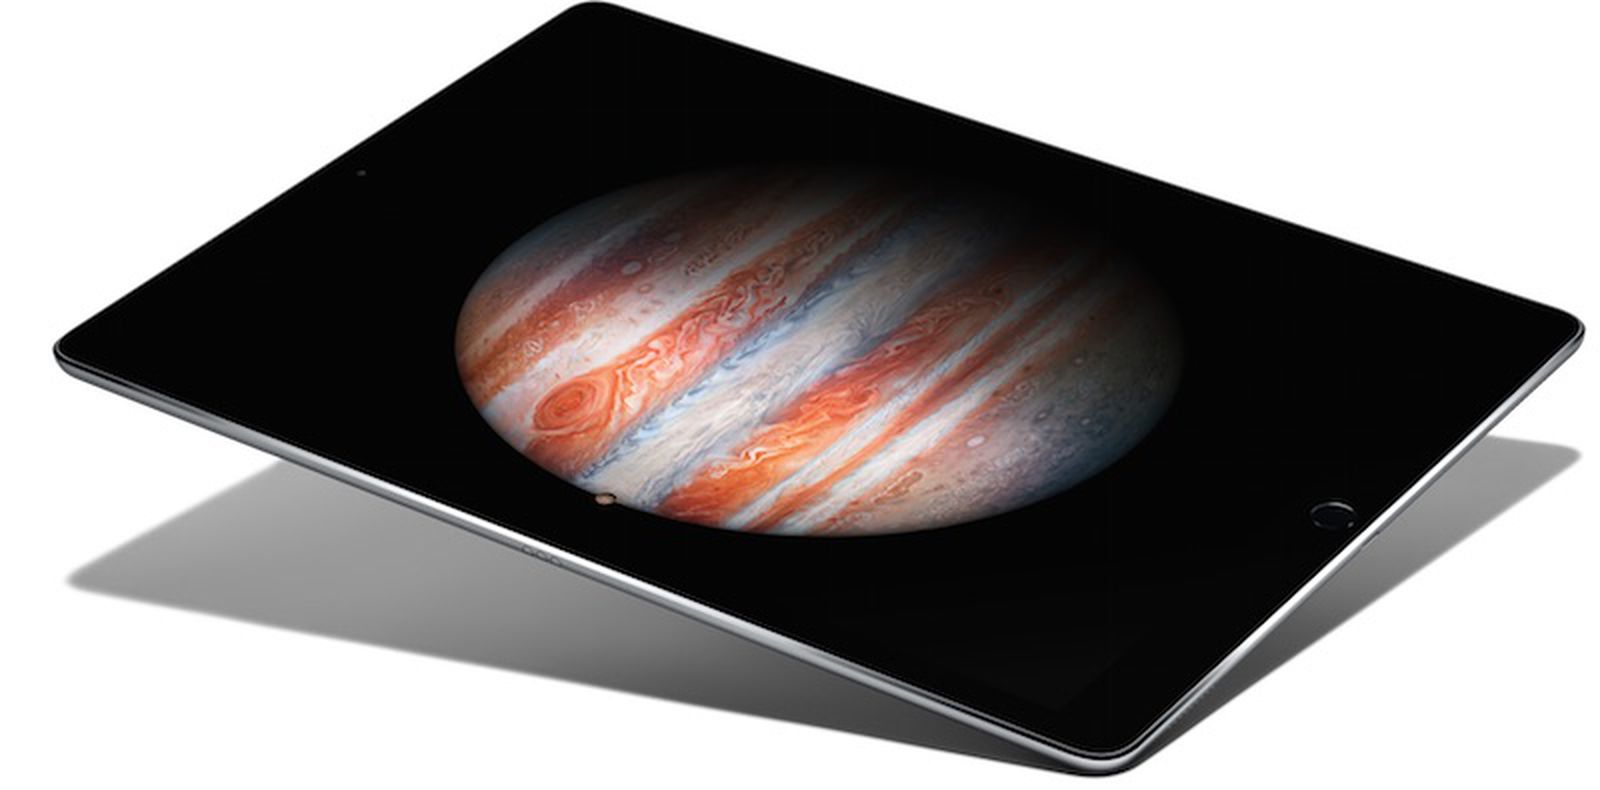 Apple Memo Says Original iPad Pro and Strangely the 'Apple TV HD' Will Become Vi..